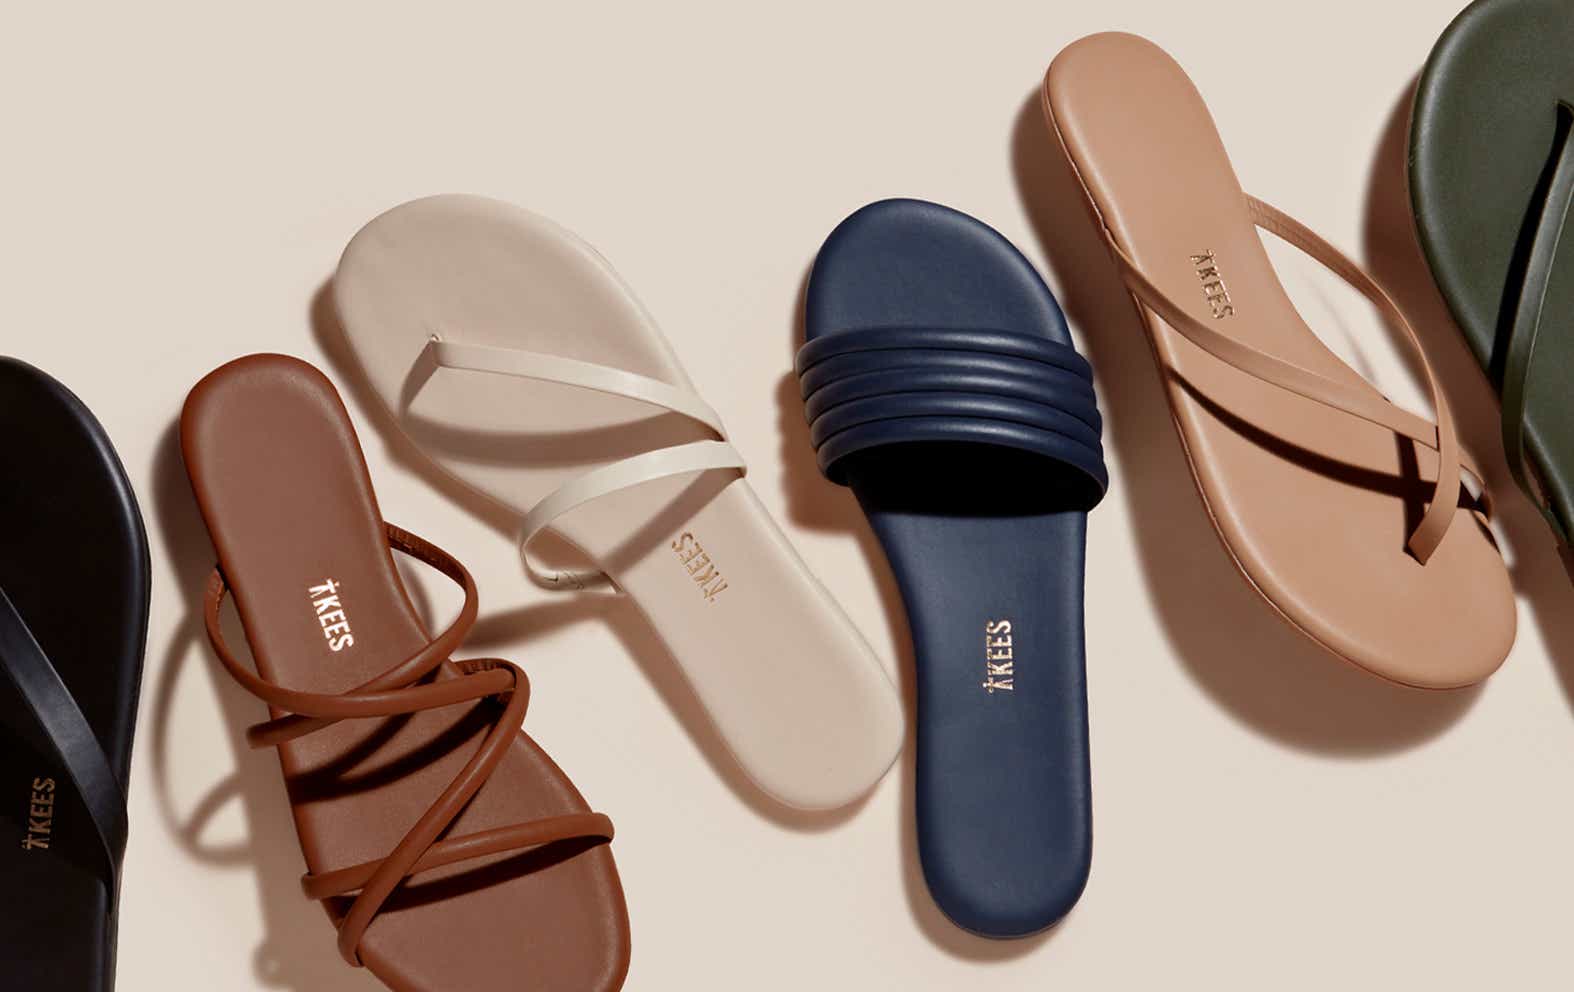 assorted TKEES sandals